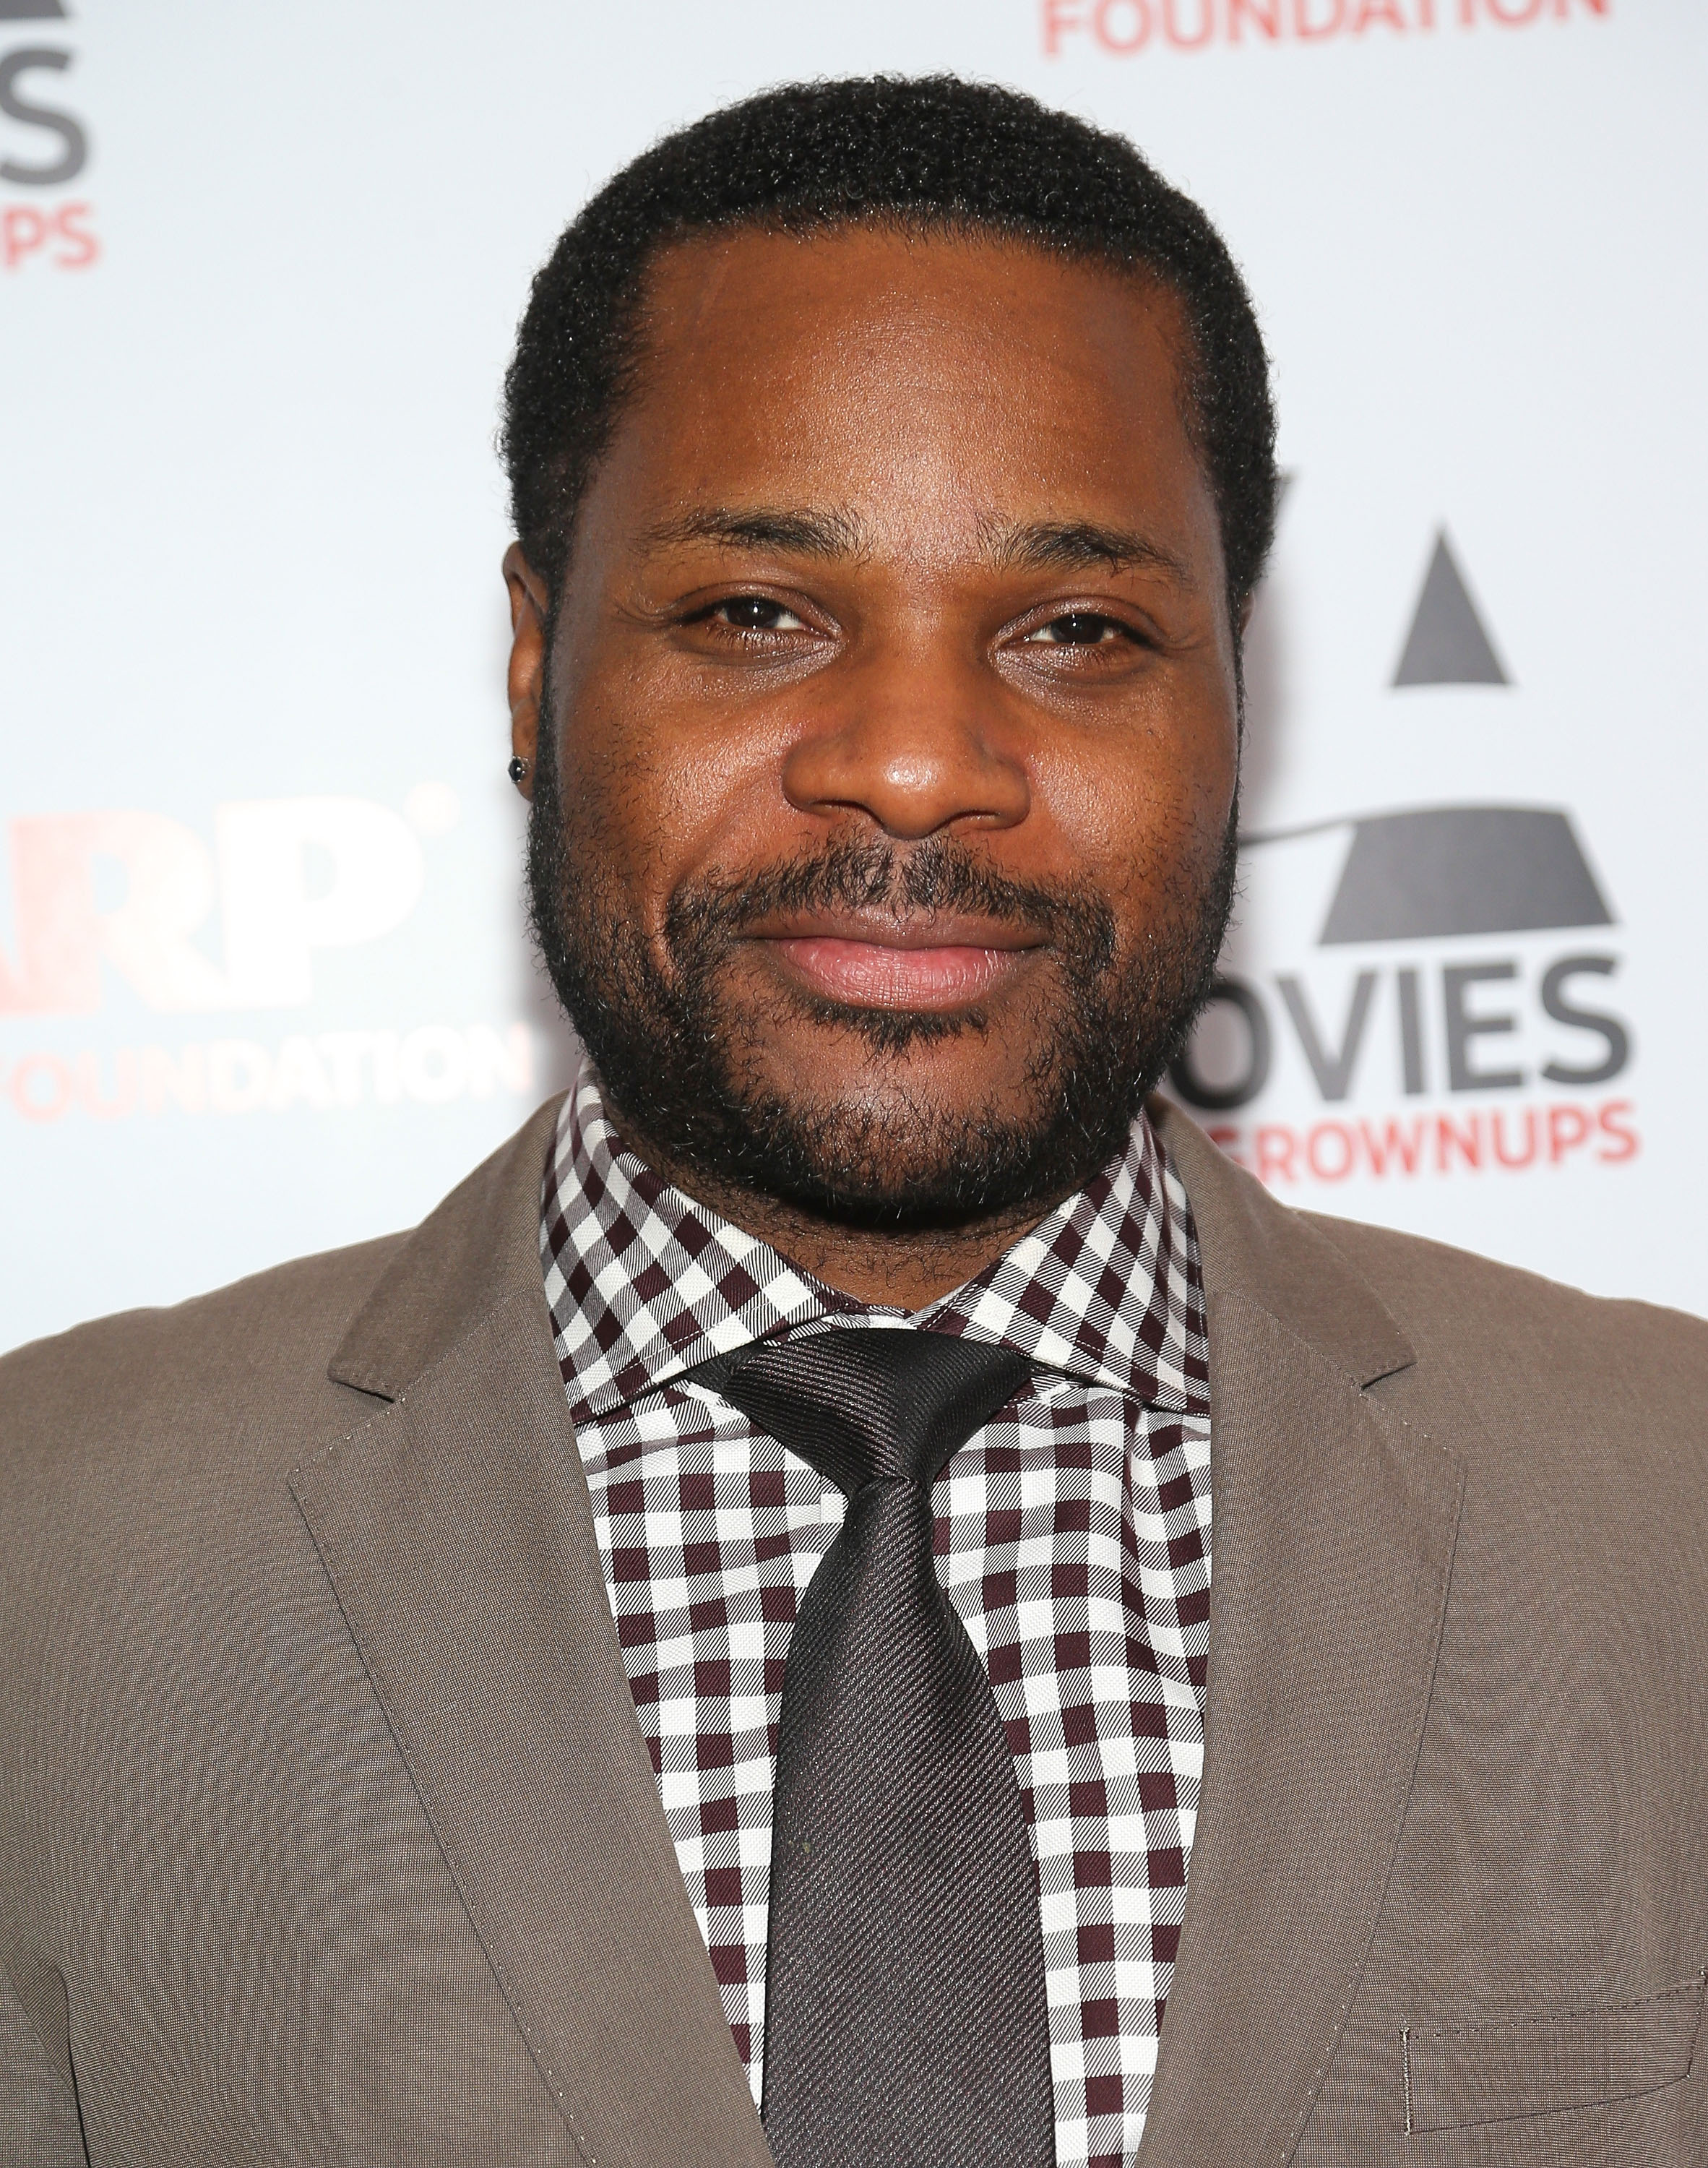 Actor Malcolm-Jamal Warner attends the 13th Annual AARP's Movies for Grownups Awards Gala at Regent Beverly Wilshire Hotel on Feb. 10, 2014, in Beverly Hills, Calif. (Imeh Akpanudosen—Getty Images)